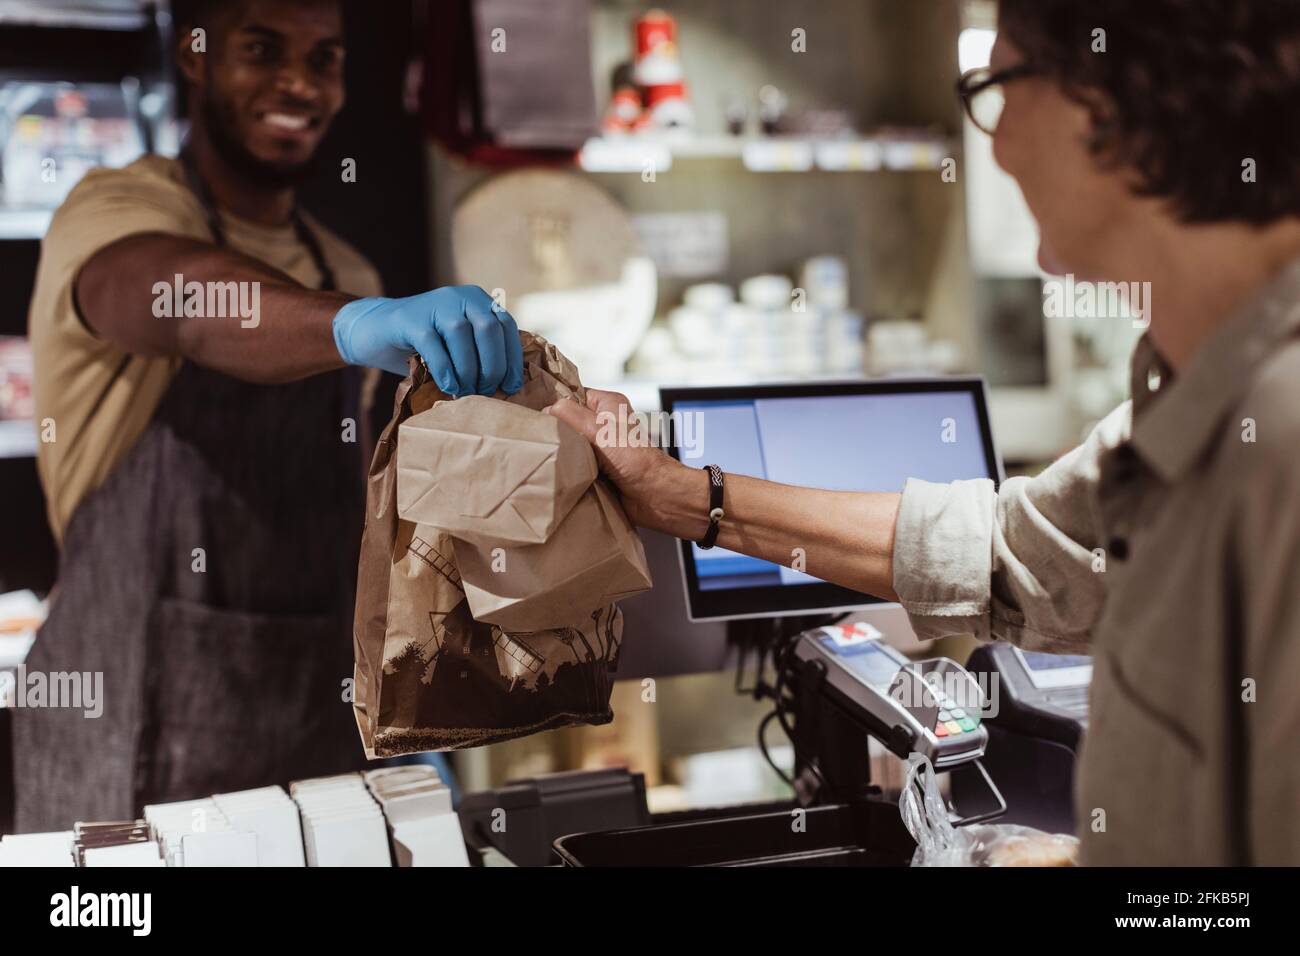 Male owner giving package order to female customer in delicatessen shop Stock Photo